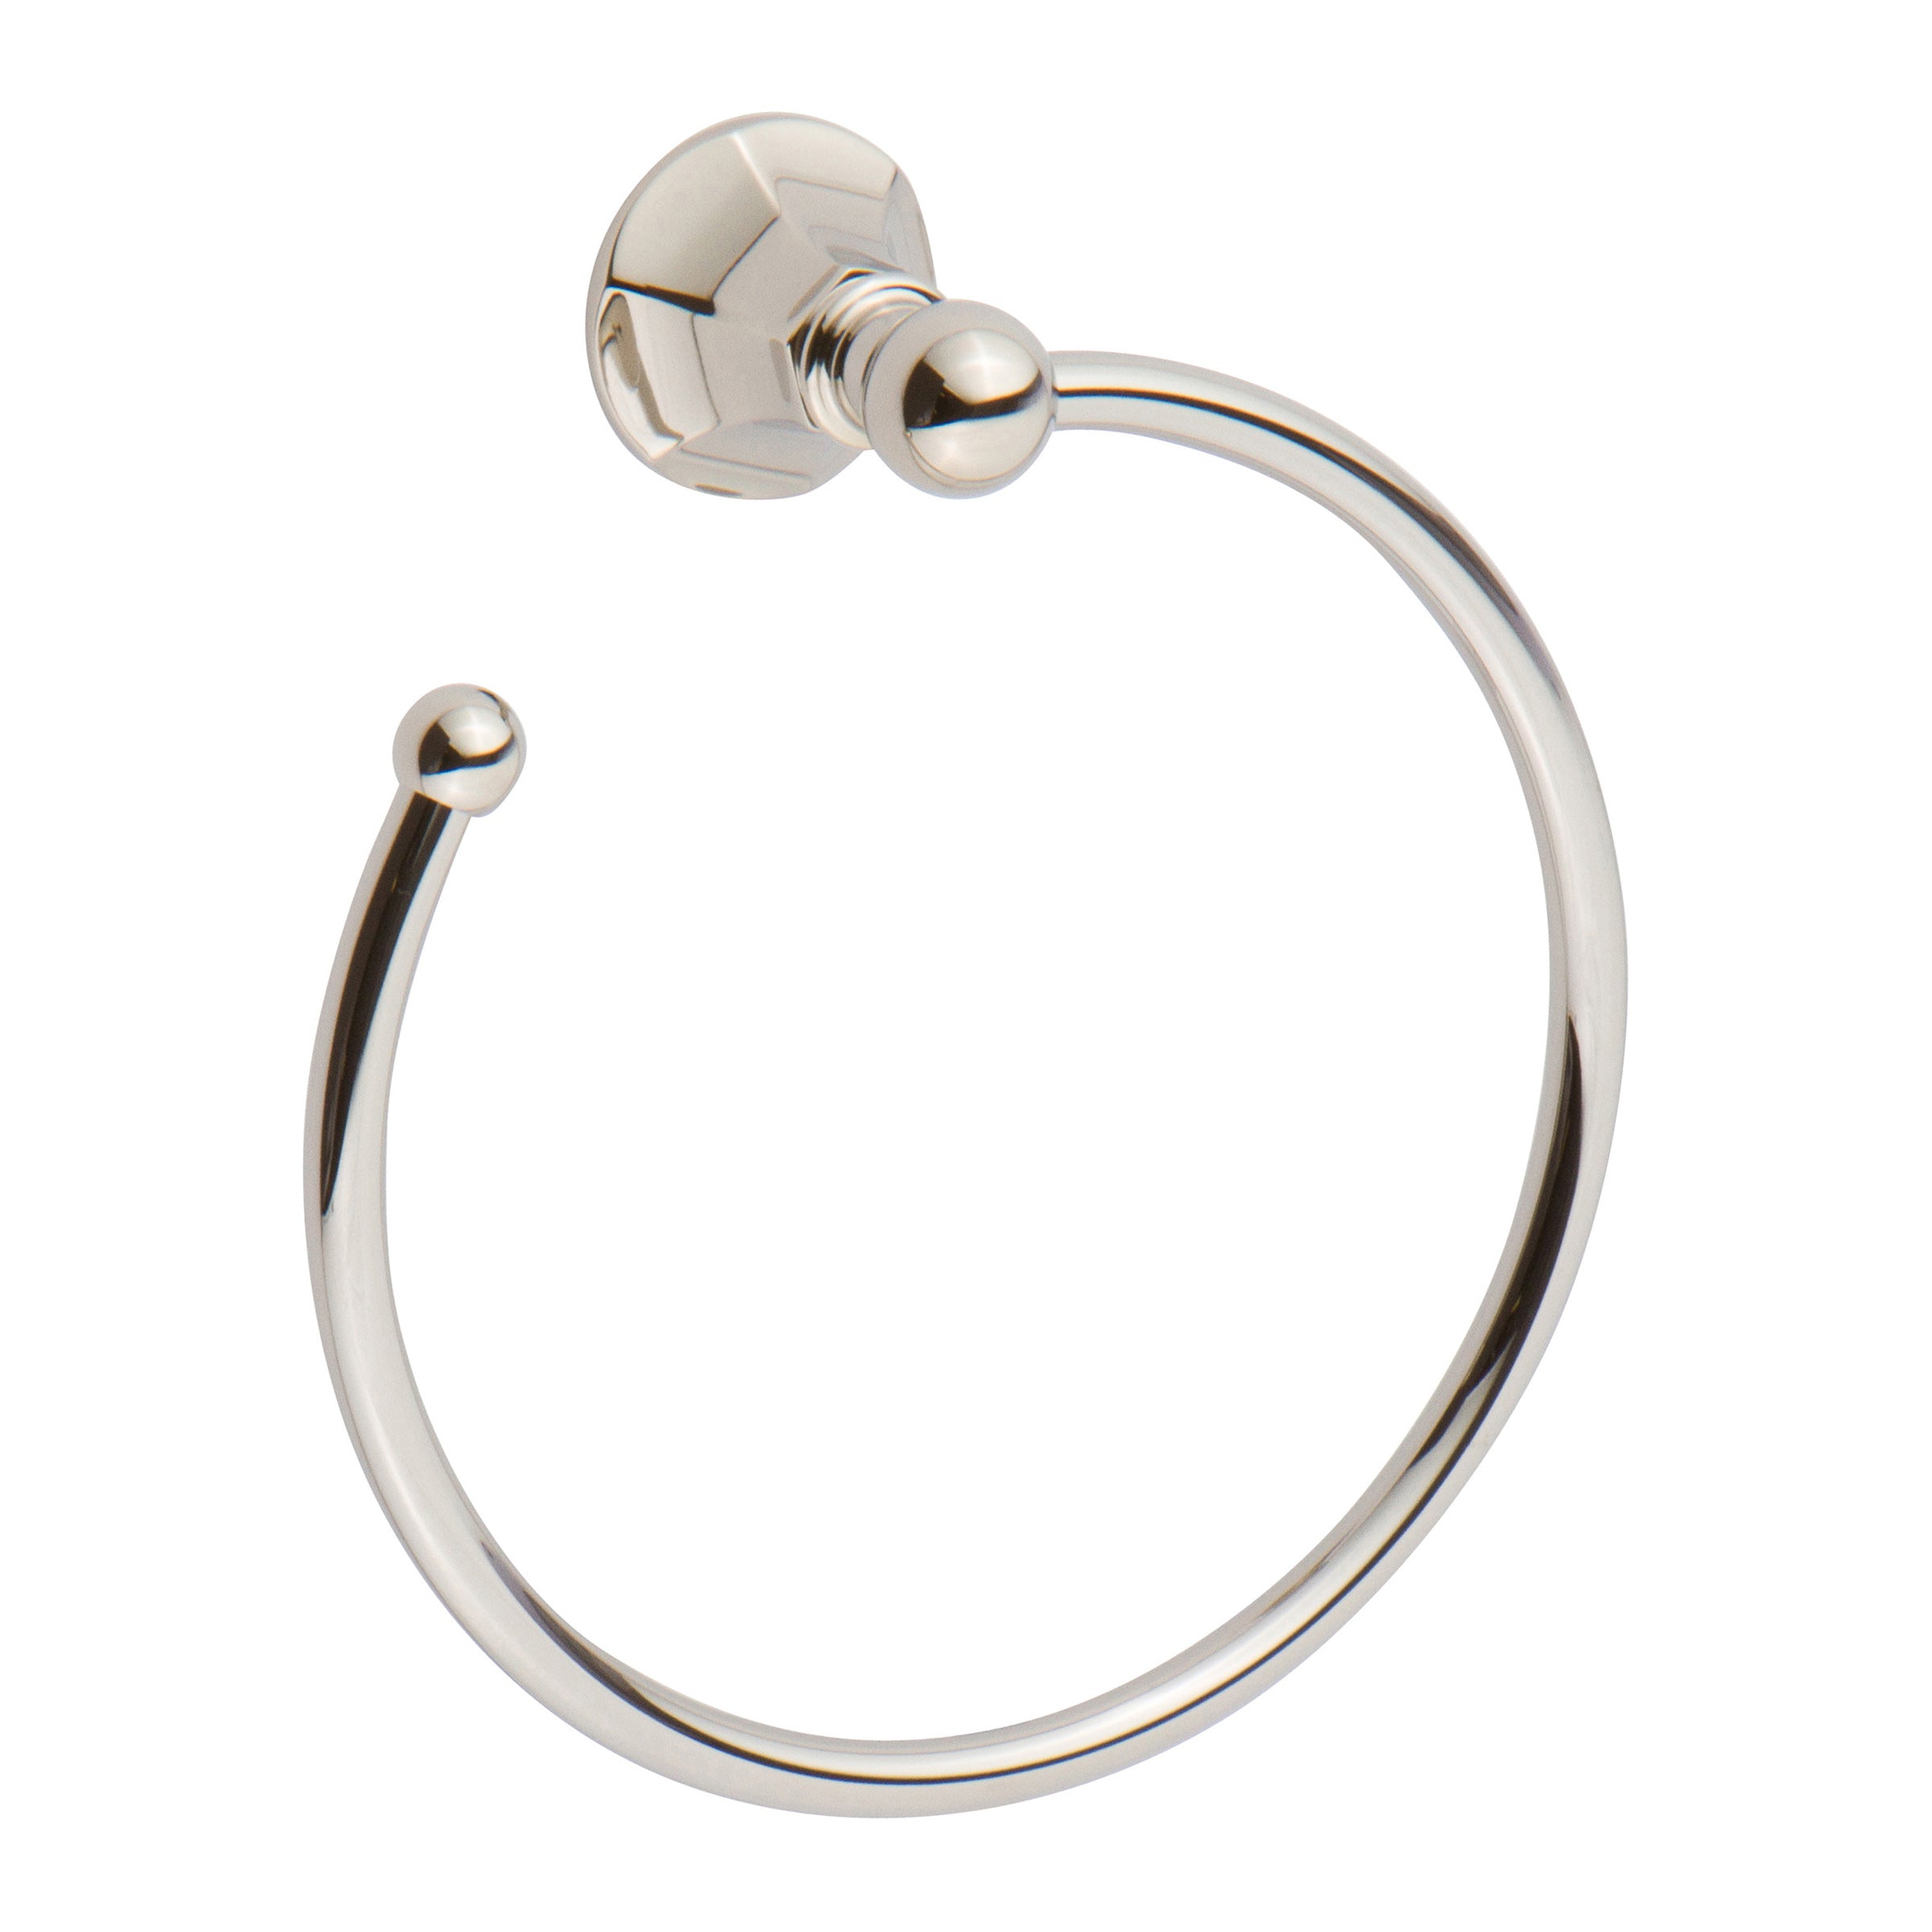 Ginger Empire Towel Ring - Open